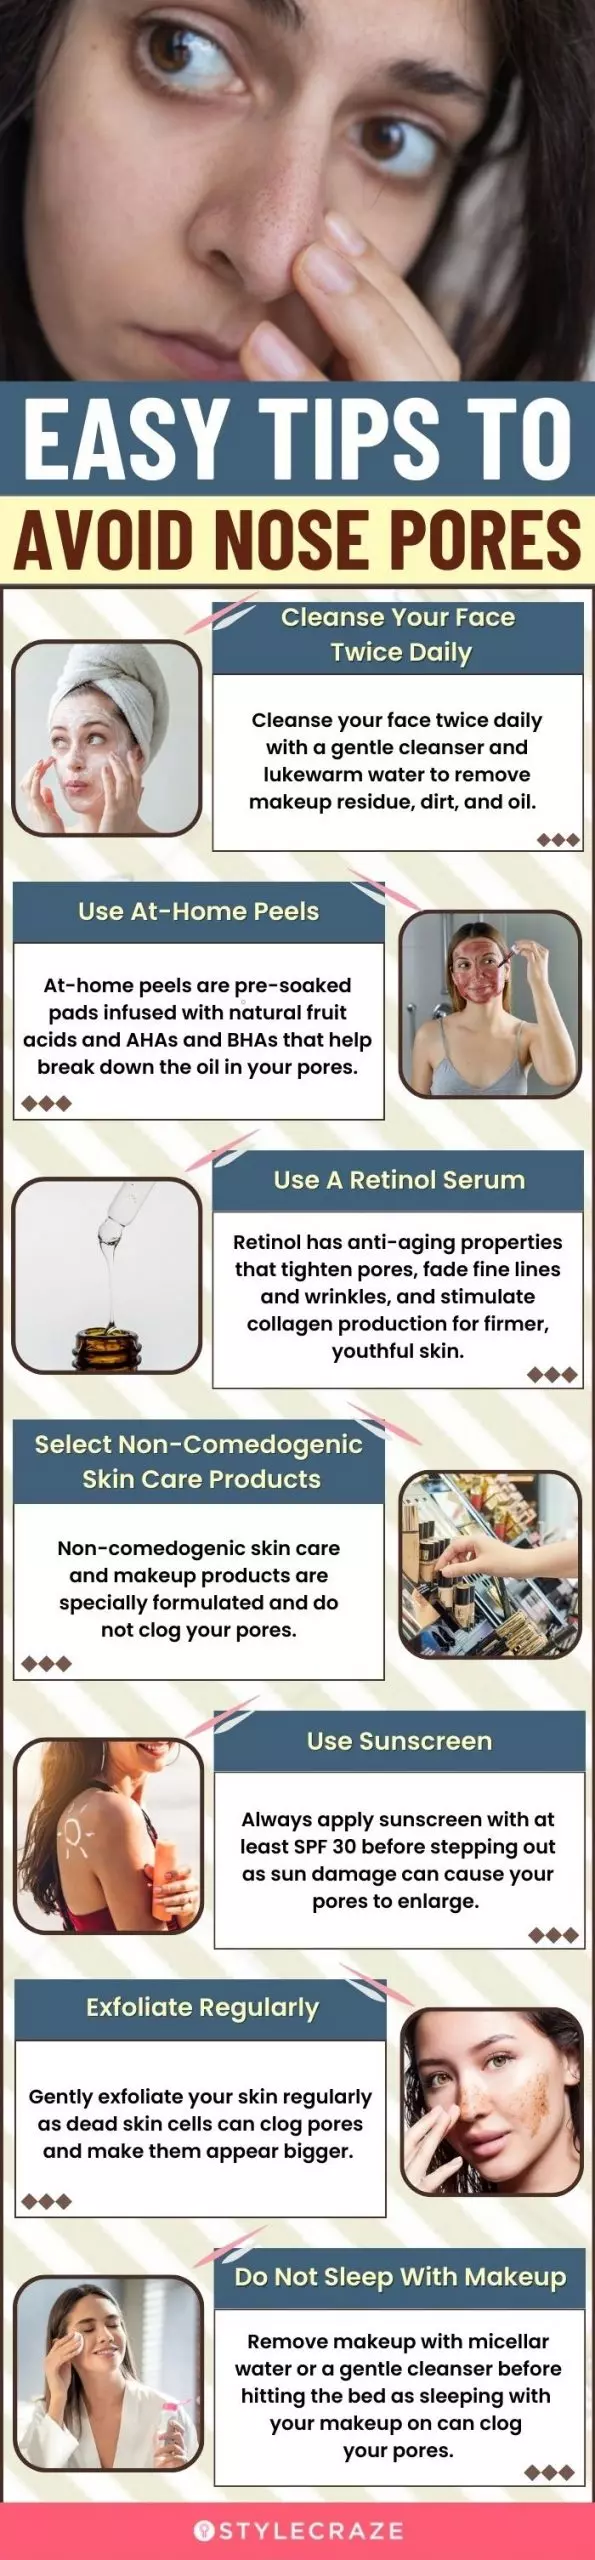 easy tips to avoid nose pores (infographic)